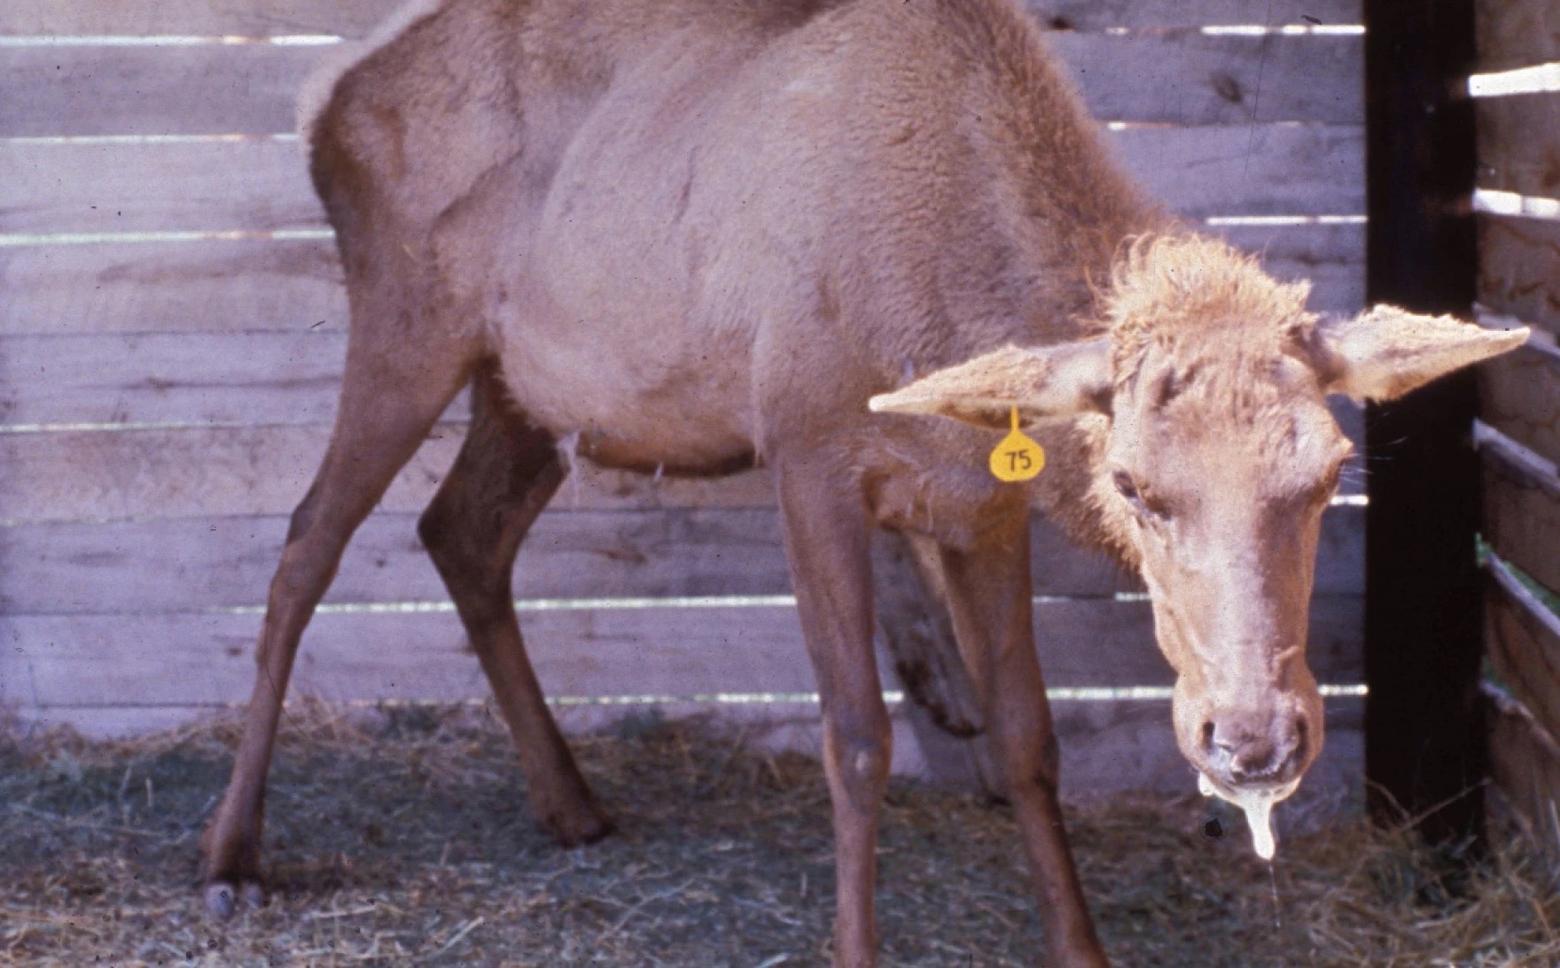 A CWD-sickened elk showing tell-tale symptoms of an animal in the final throes of illness. This wapiti was part of a study at a captive facility in Wyoming showing that elk do not have immunity to CWD. Photo courtesy Wyoming Game and Fish